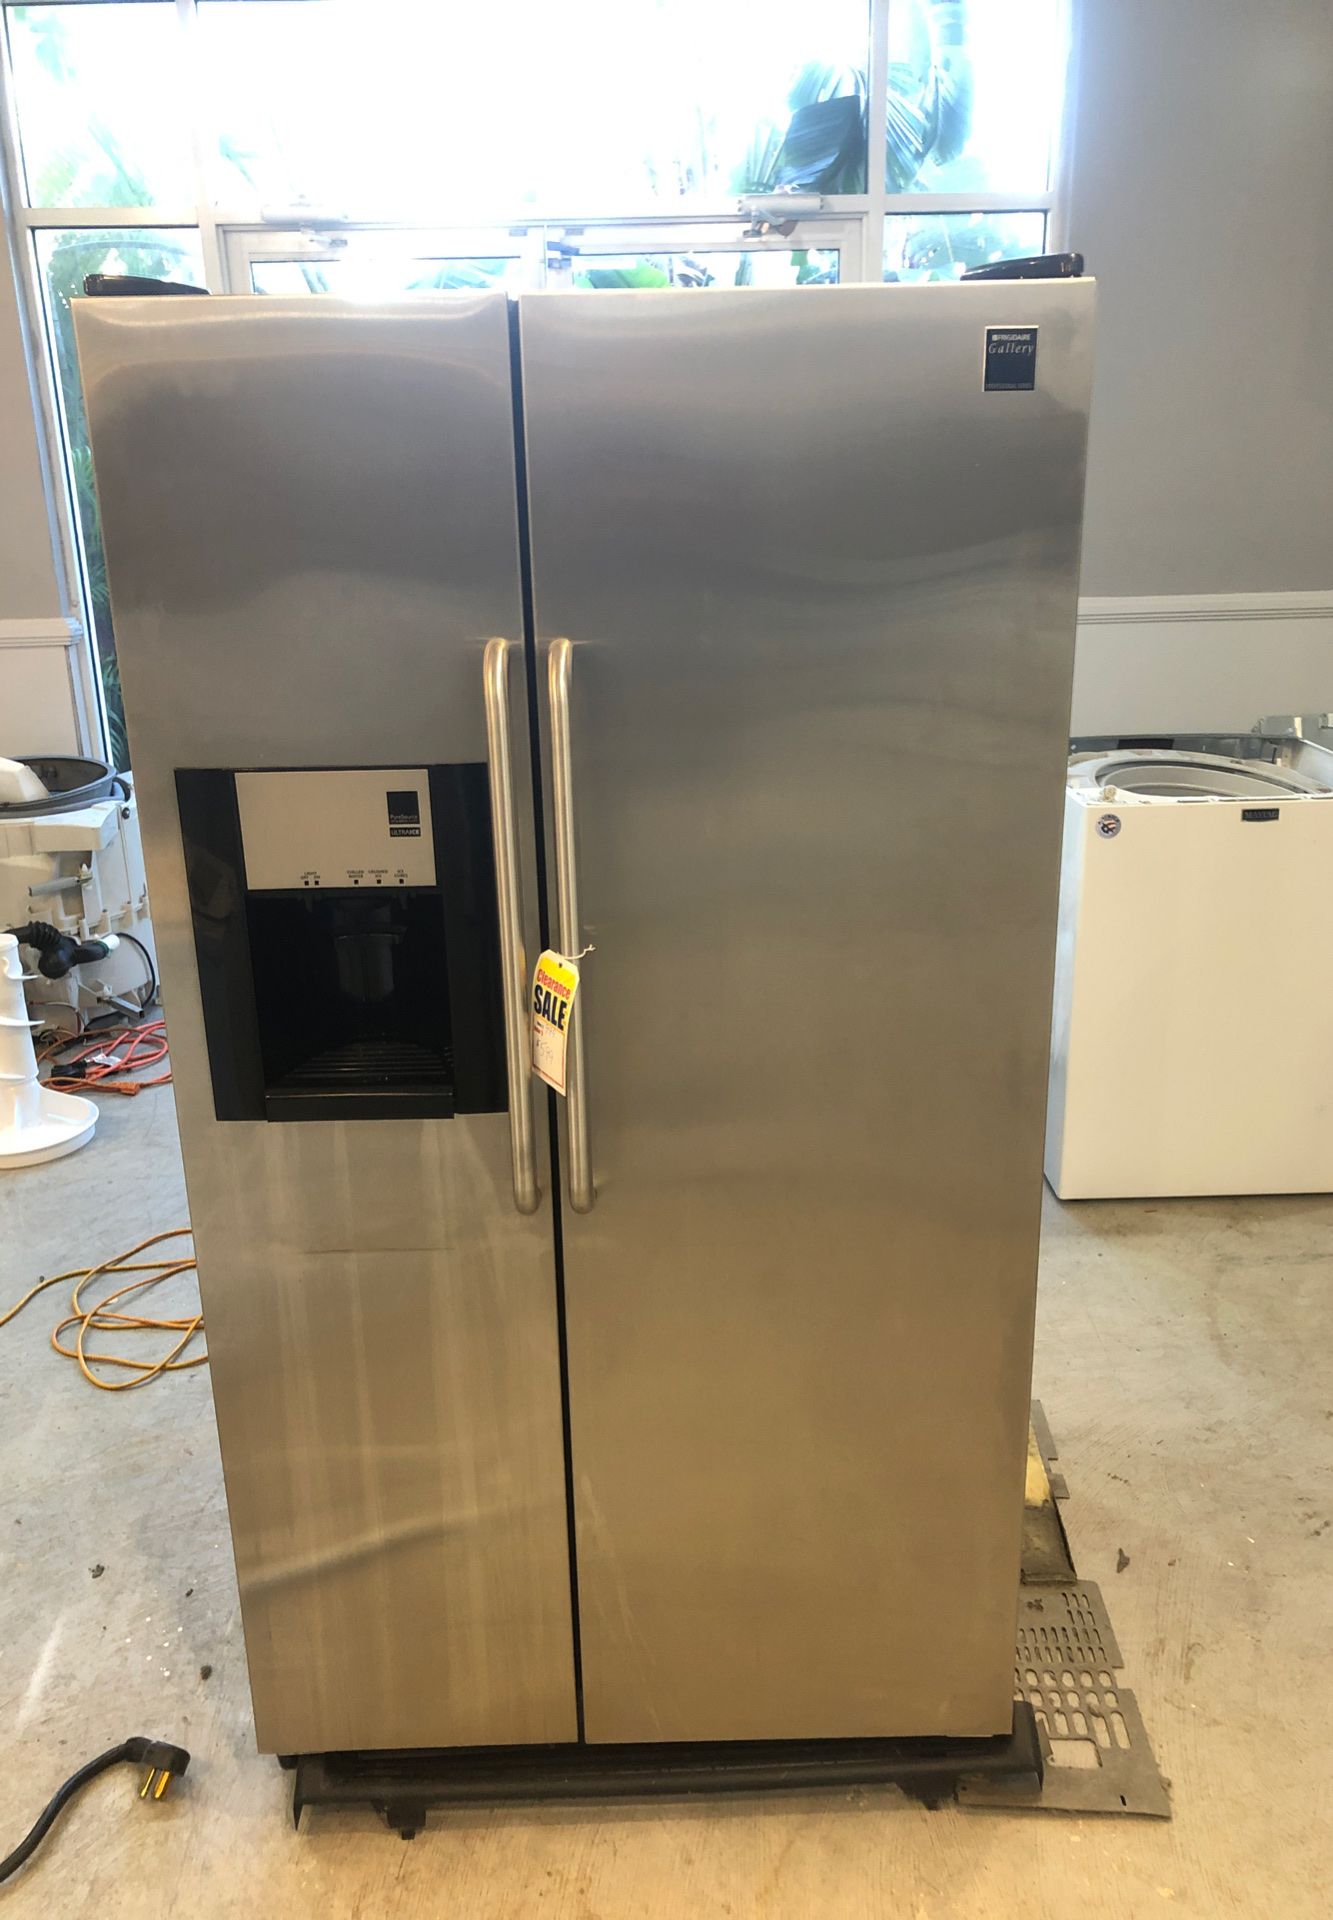 Stainless steel fridge raider made by Frigidaire 100% certified with warranty only 599